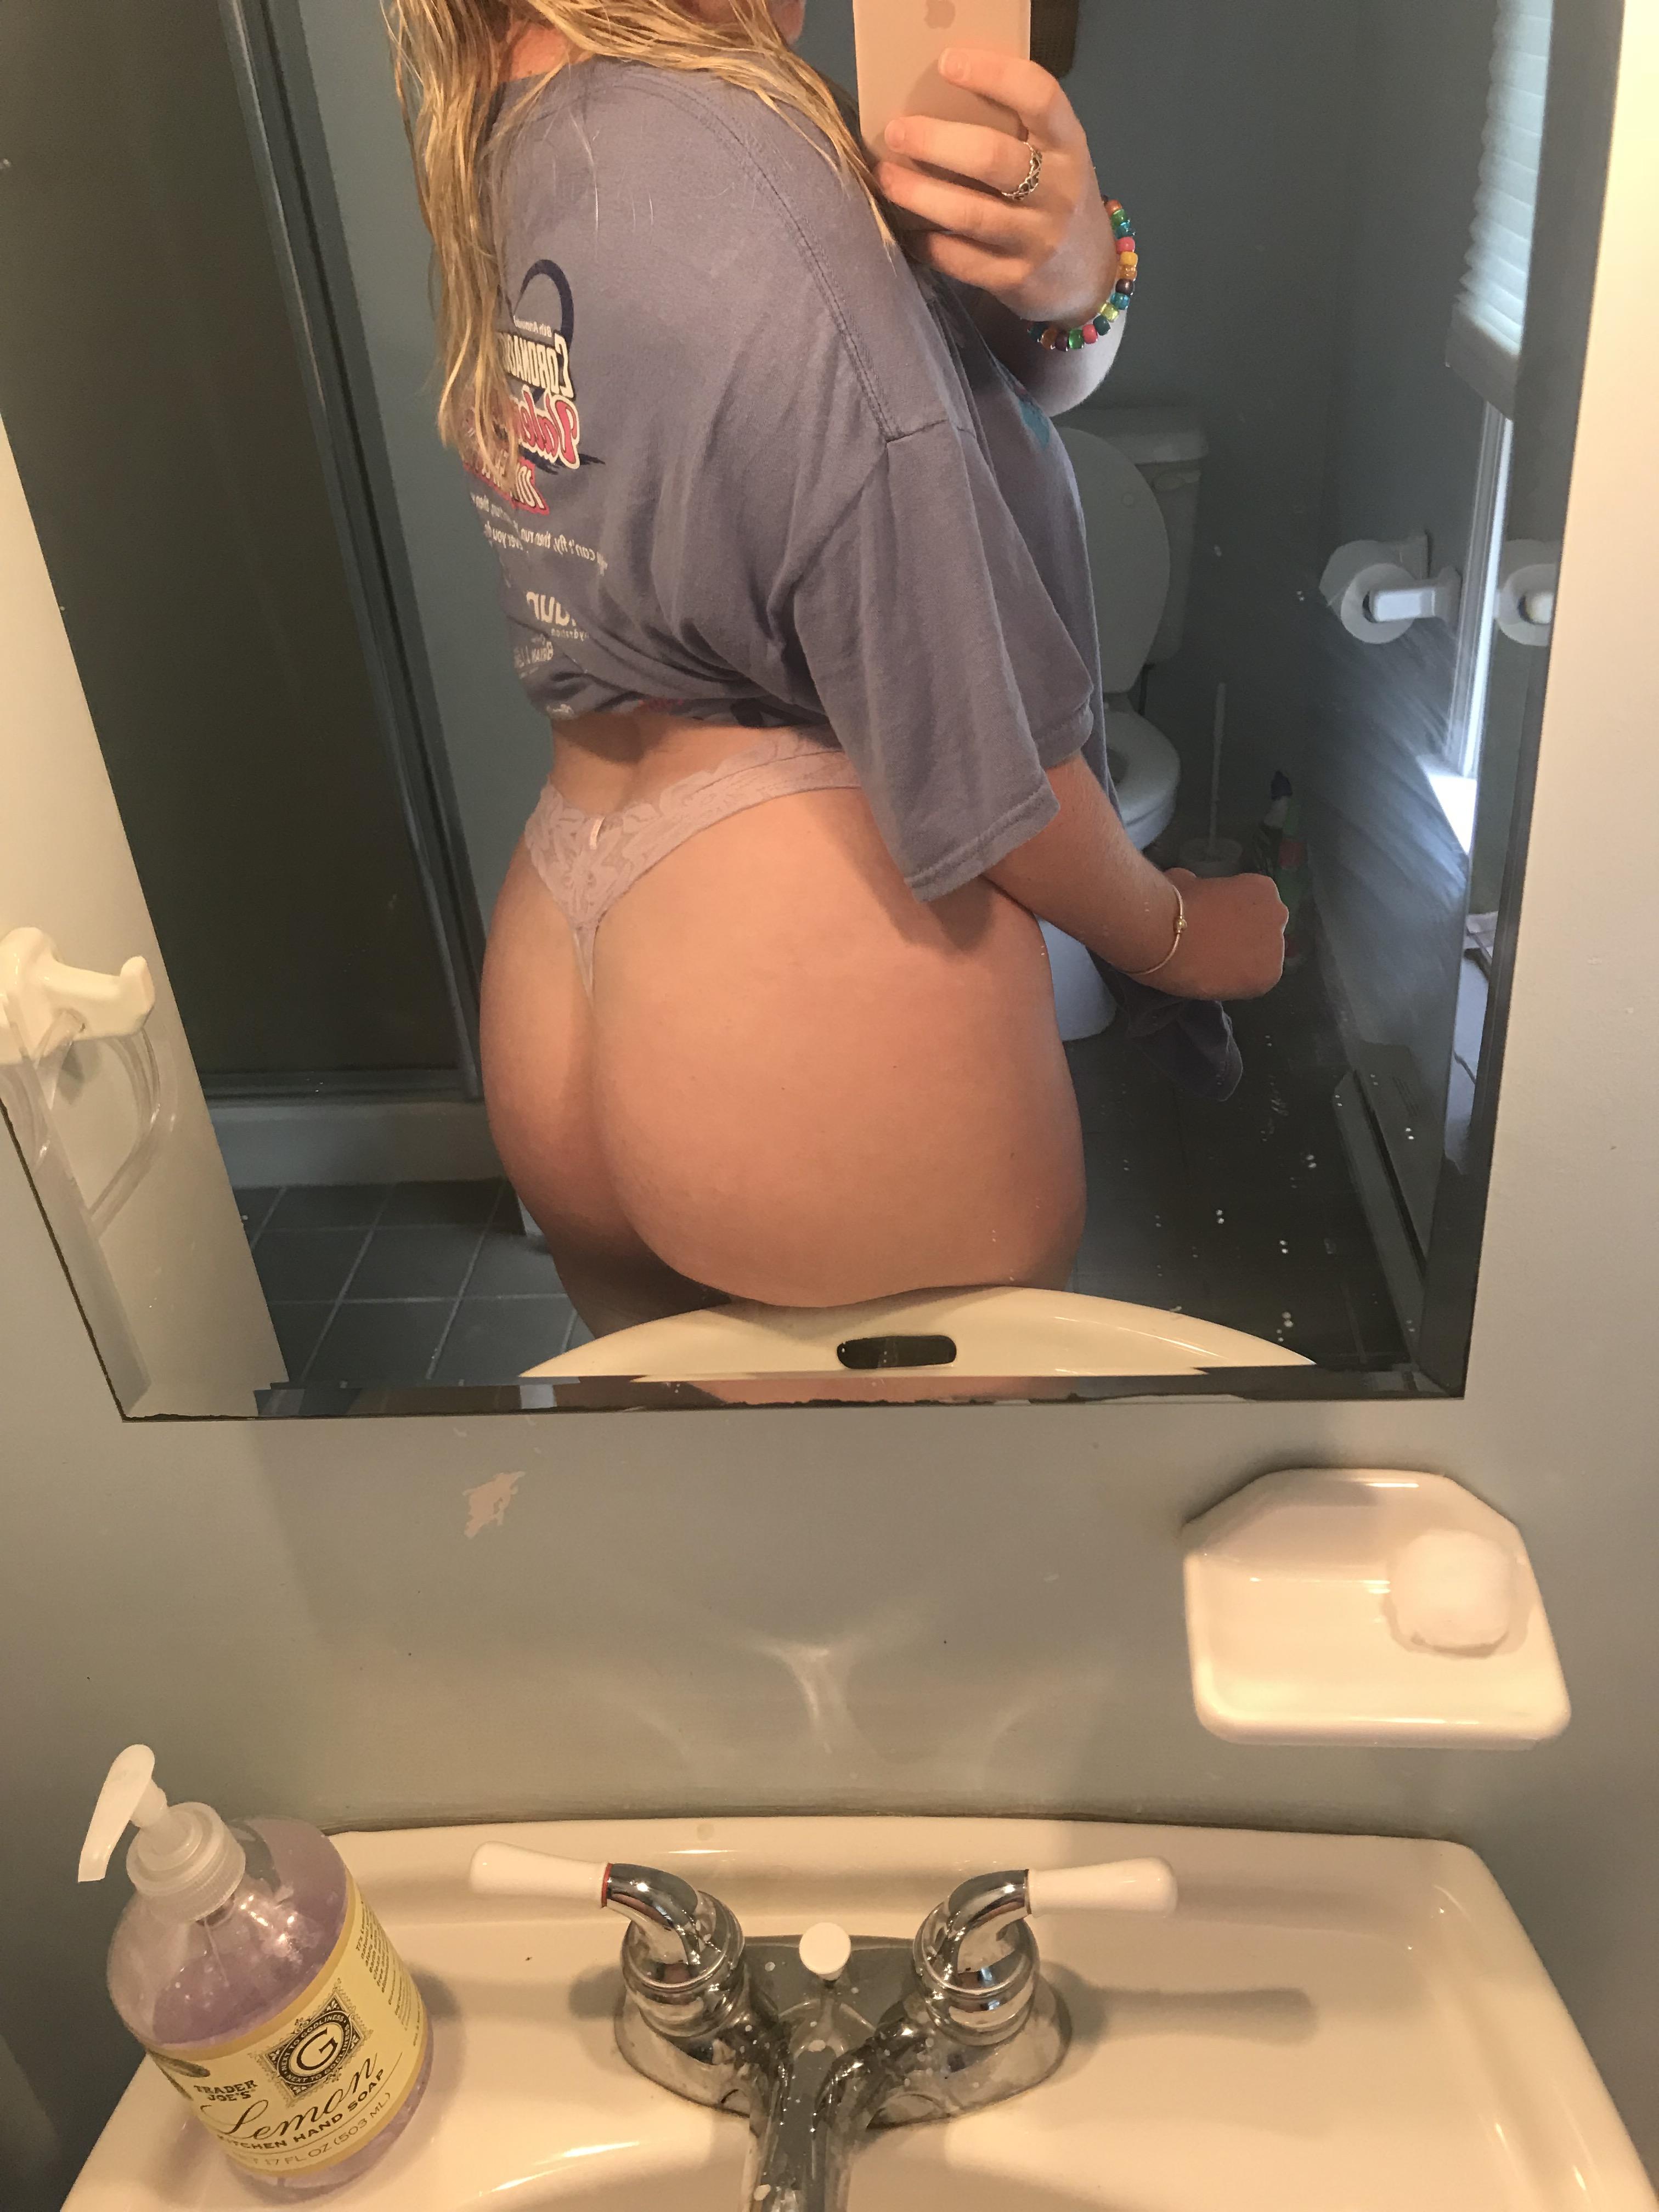 My boyfriend hates anal, but I’m dying for a hard, throbbing cock in my ass [22F]